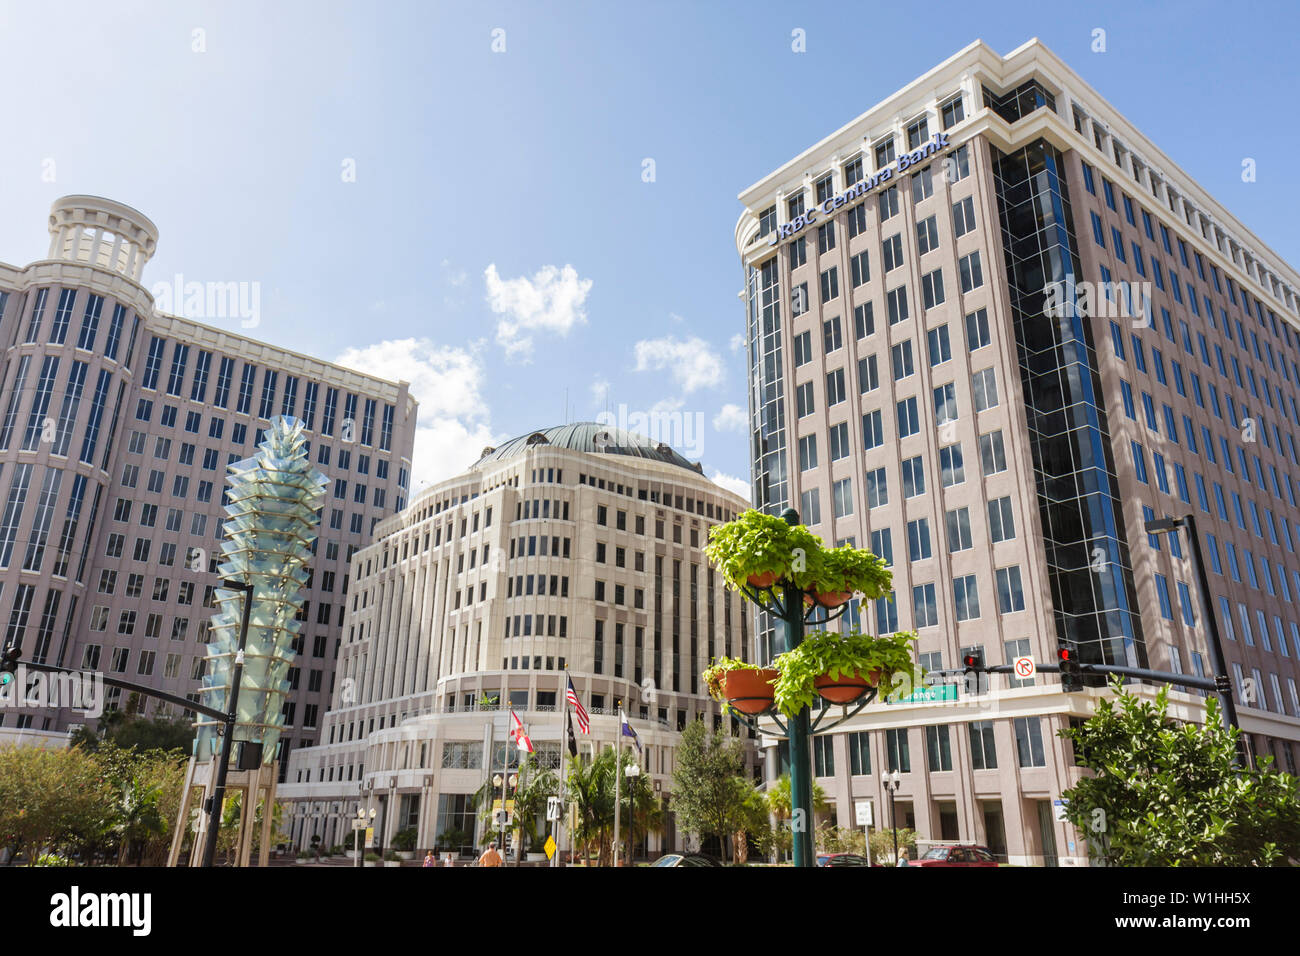 Orlando Florida,Orange Avenue,downtown,skyline,City Hall,building,office building,RBC Centura Bank,banking,district,government,Tower of Light,art,scul Stock Photo